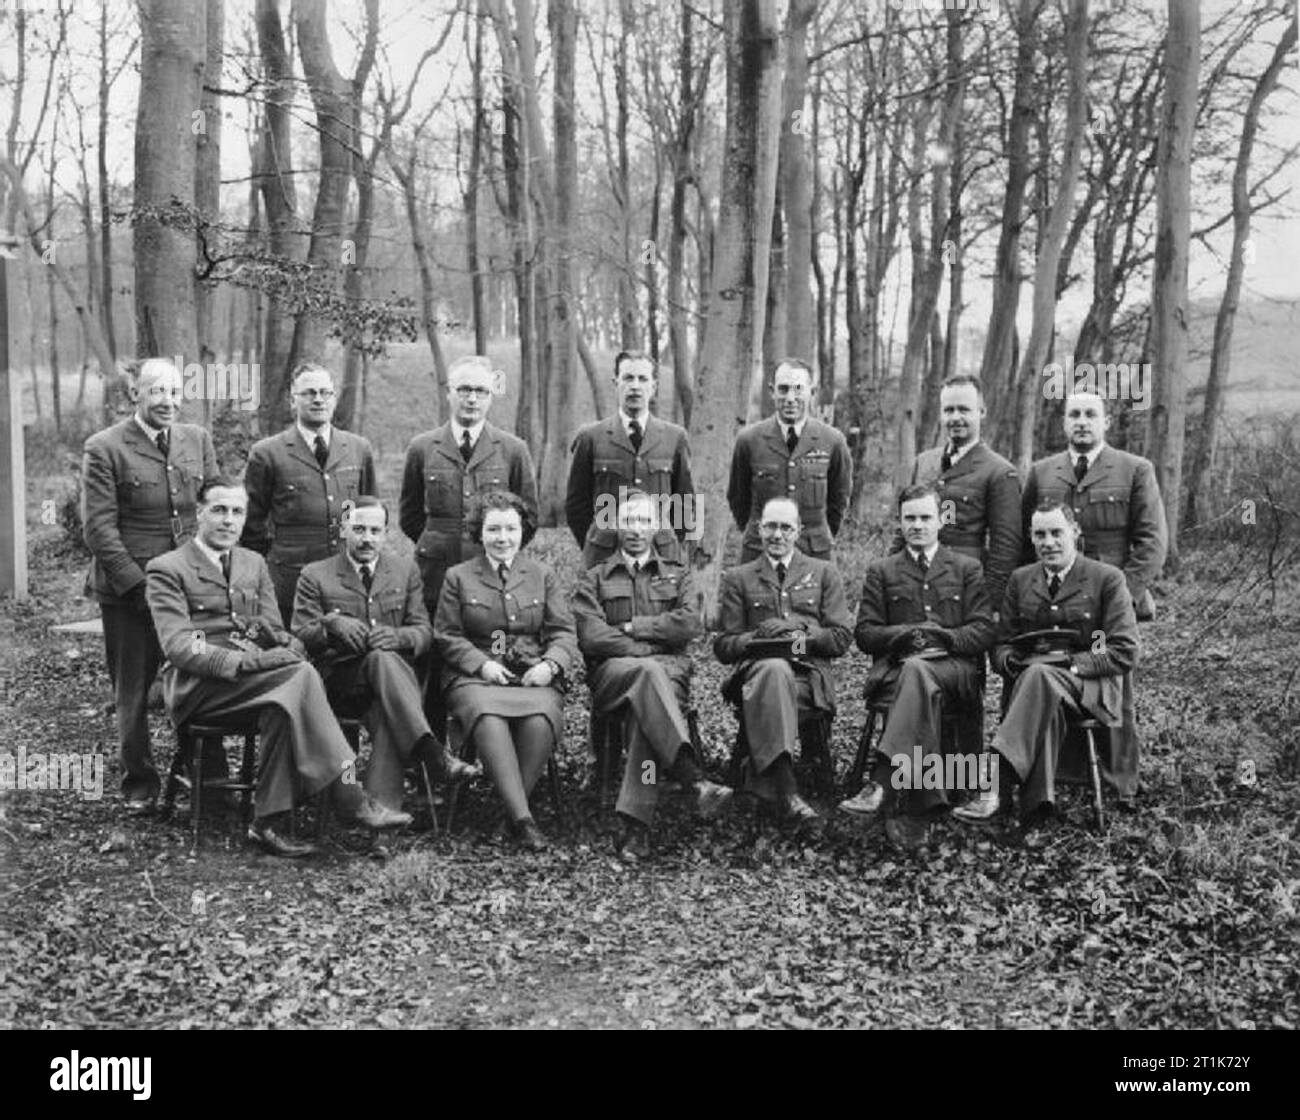 Photography during the Second World War A group of Bomber Command Photographic Officers, led by Group Captain F C Sturgiss OBE. Standing left to right: Squadron Leader E King, Squadron Leader J E Brown, Squadron Leader J Jameson, Flight Lieutenant J S Cabot, Squadron Leader L Mant, Squadron Leader A S Archer (from Canada), Pilot Officer R G Cleave. Sitting left to right: Squadron Leader H W Lees, Squadron Leader L Hardy, Station Officer T Hamilton-Jones, Group Captain F C Sturgiss, Squadron Leader F L Wills, Flight Lieutenant J J McCloskey, Squadron Leader J E Archibald. Stock Photo